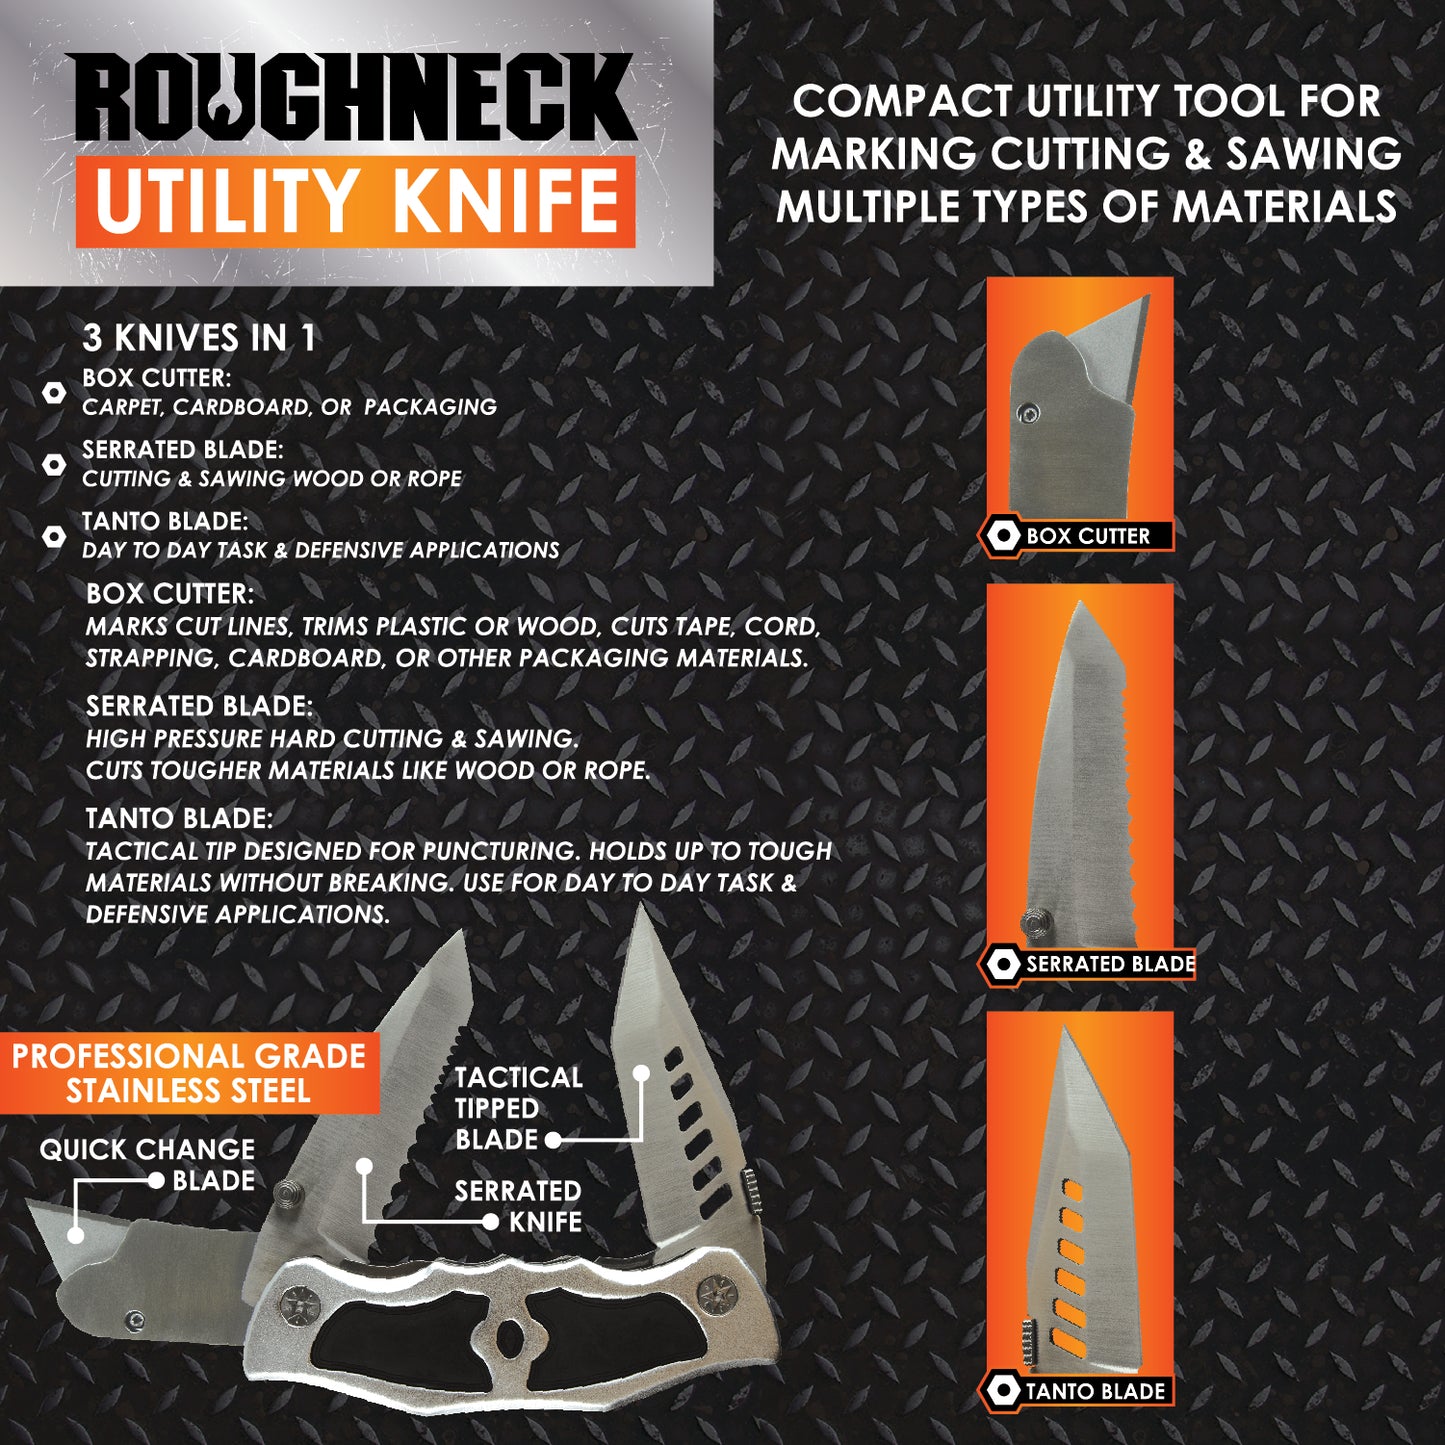 ITEM NUMBER 023388L ROUGHNECK UTILITY KNIFE - STORE SURPLUS NO DISPLAY 6 PIECES PER PACK